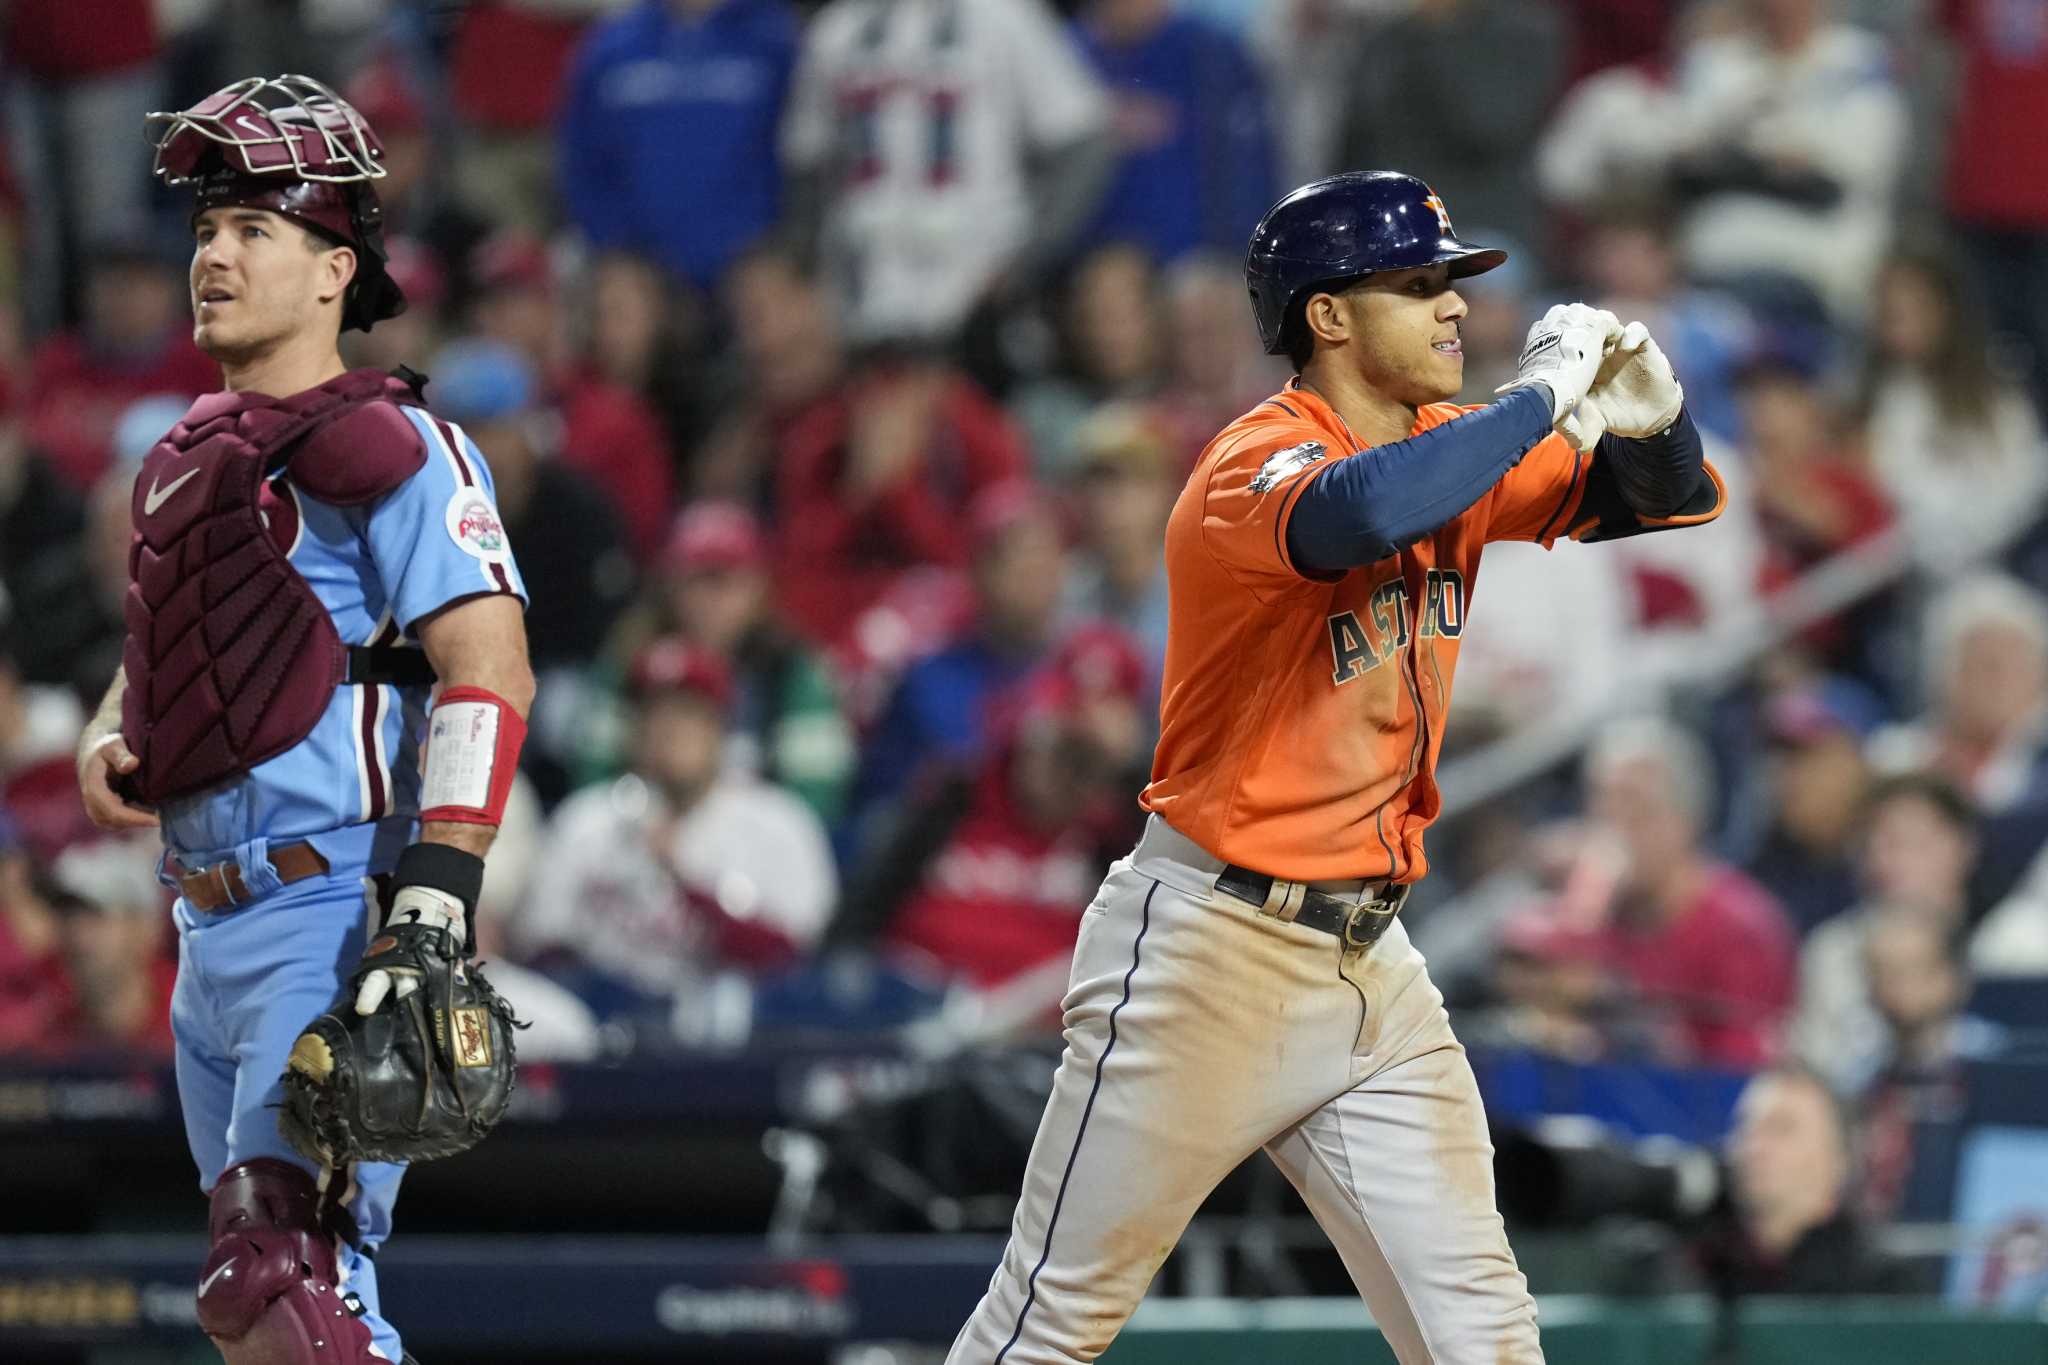 Houston Astros: Jeremy Peña delivers in the clutch again